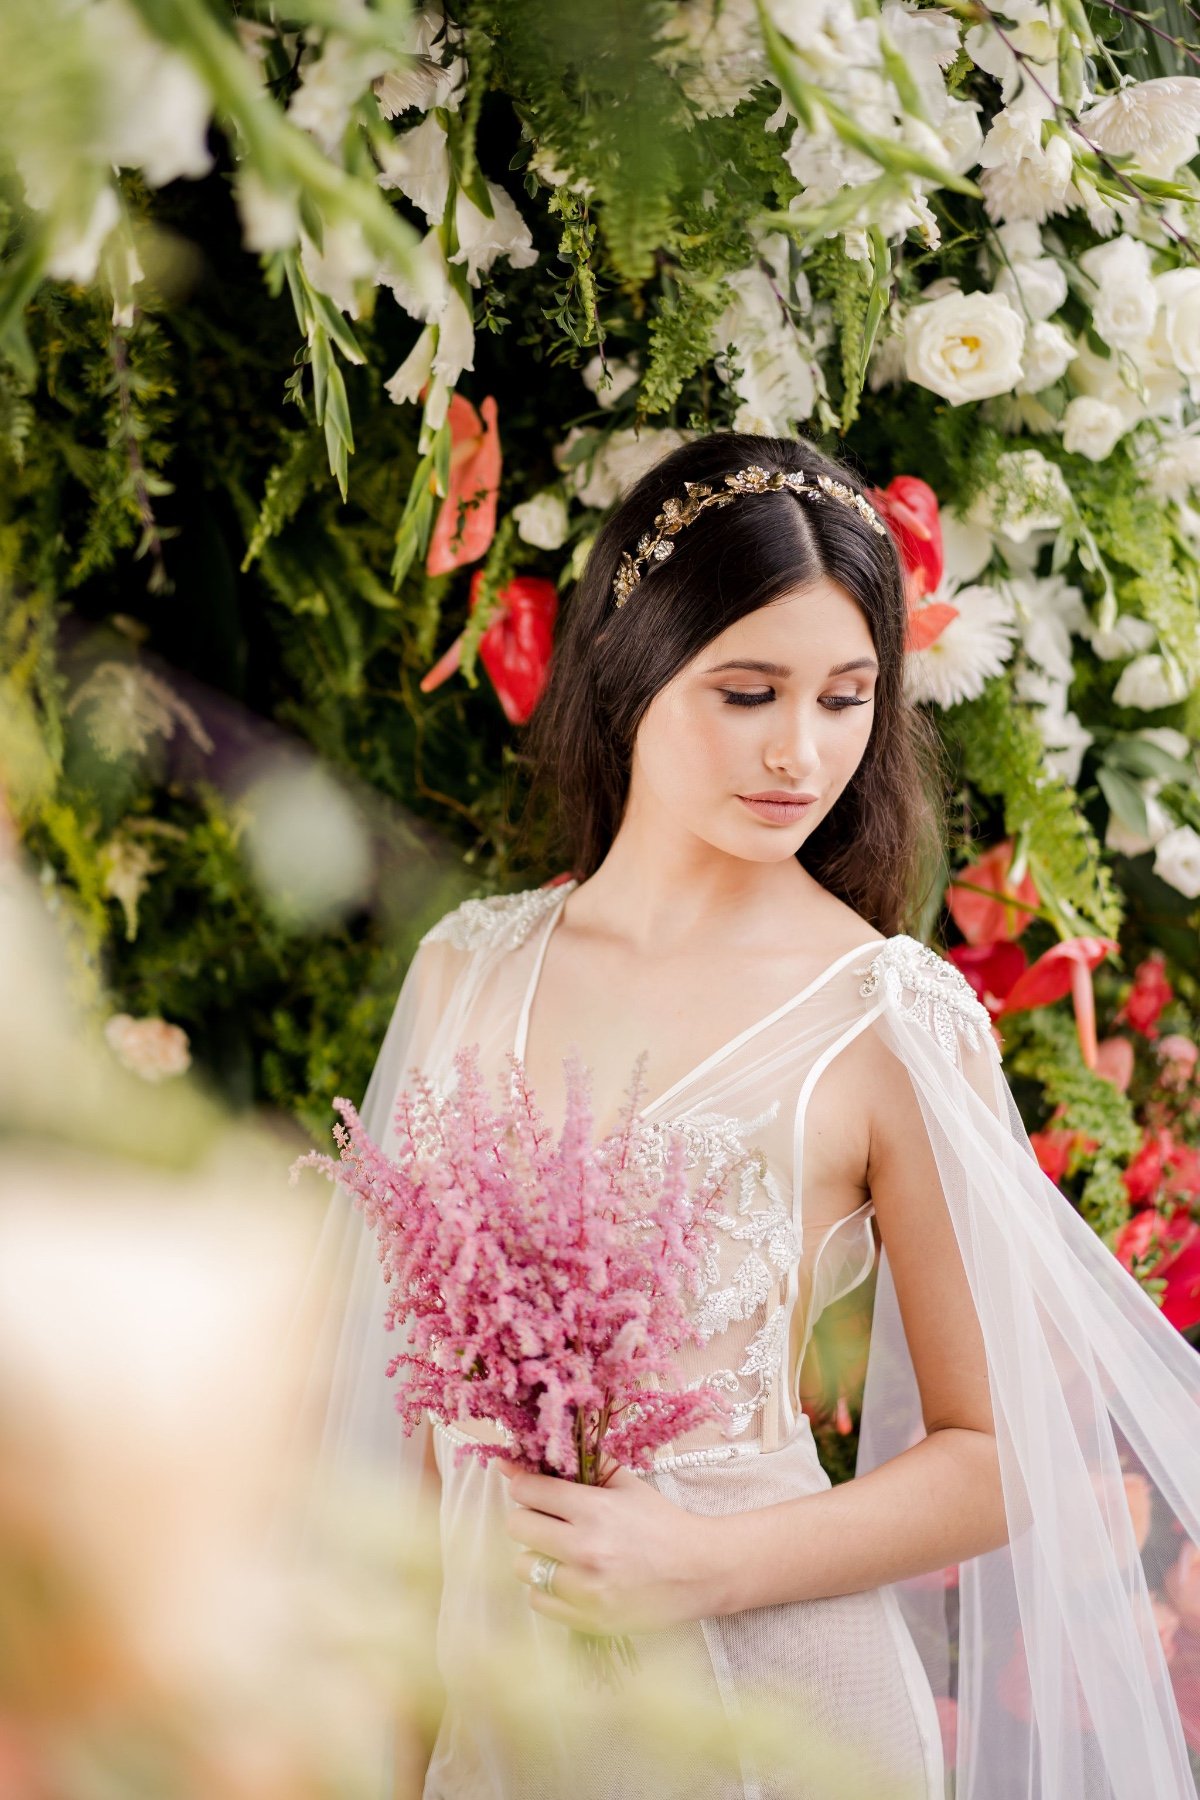 Tropical Wedding Inspiration In Costa Rica That Is Far From Boho